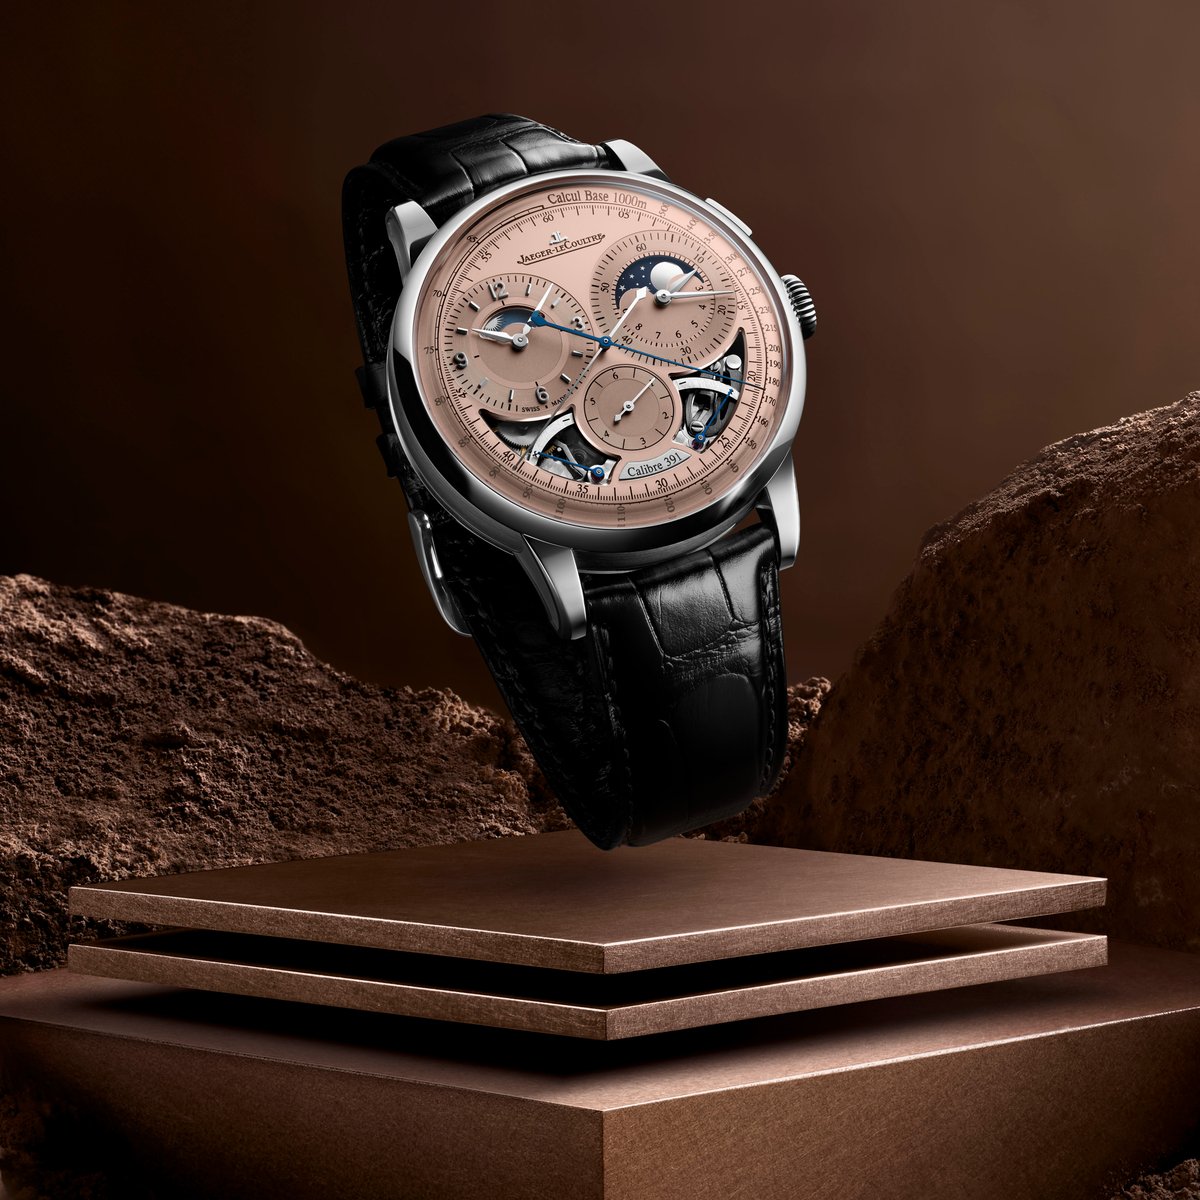 Unveiling the new Duometre Chronograph Moon. The high precision of a chronograph with the charm of a celestial complication. Deep dive into a world of precision: bit.ly/ThePrecisionPi…. #JaegerLeCoultre #PrecisionMaker #WatchesAndWonders2024